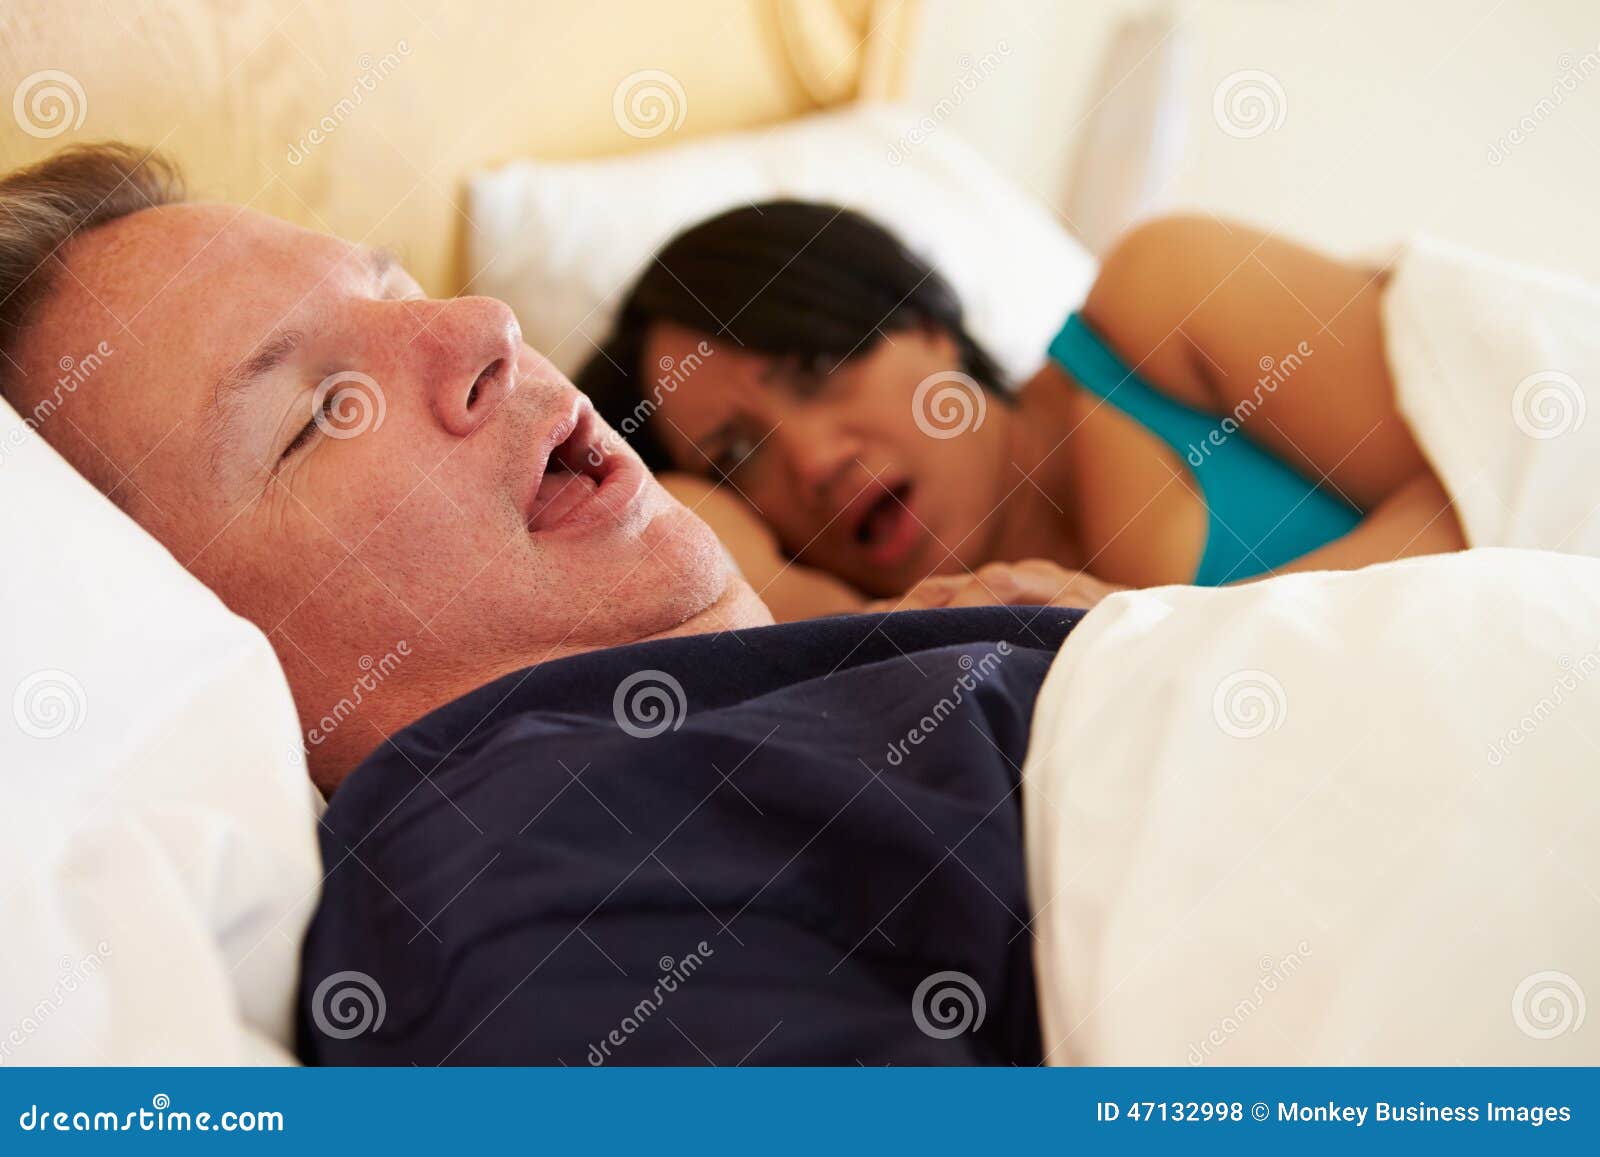 couple asleep in bed with man snoring